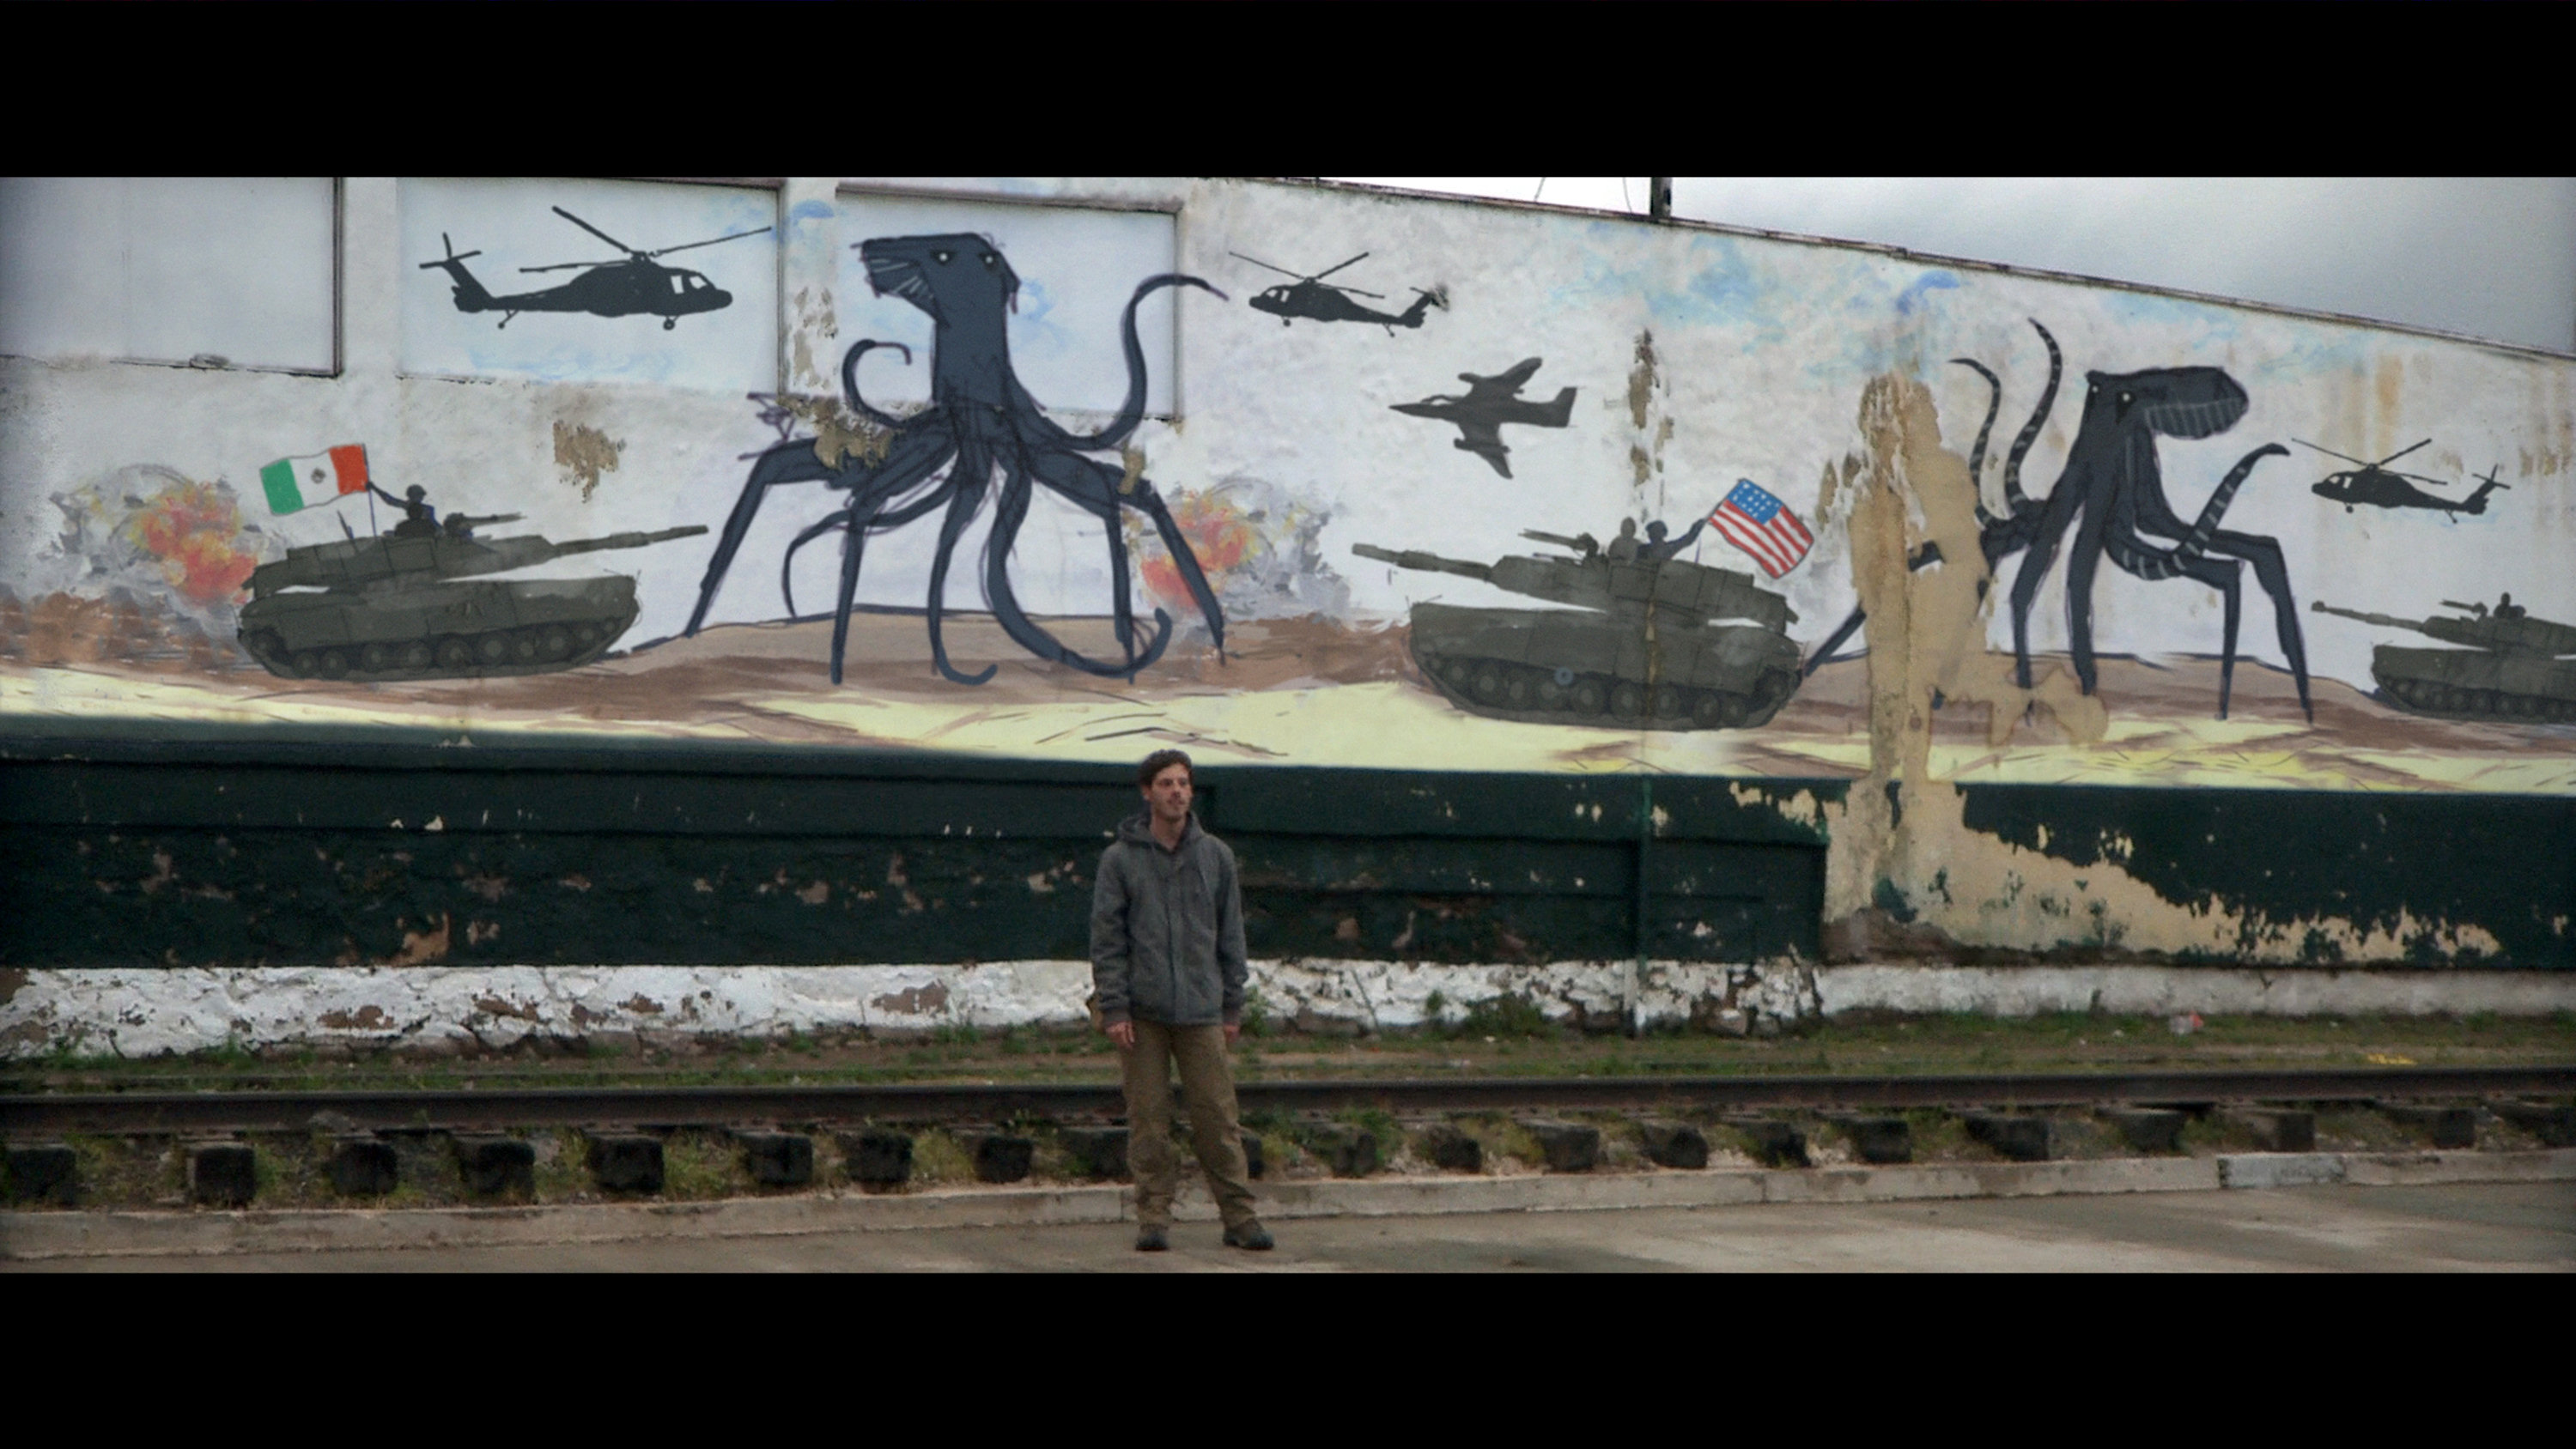  The mural in the background depicts Mexico and US forces battling the alien creatures.